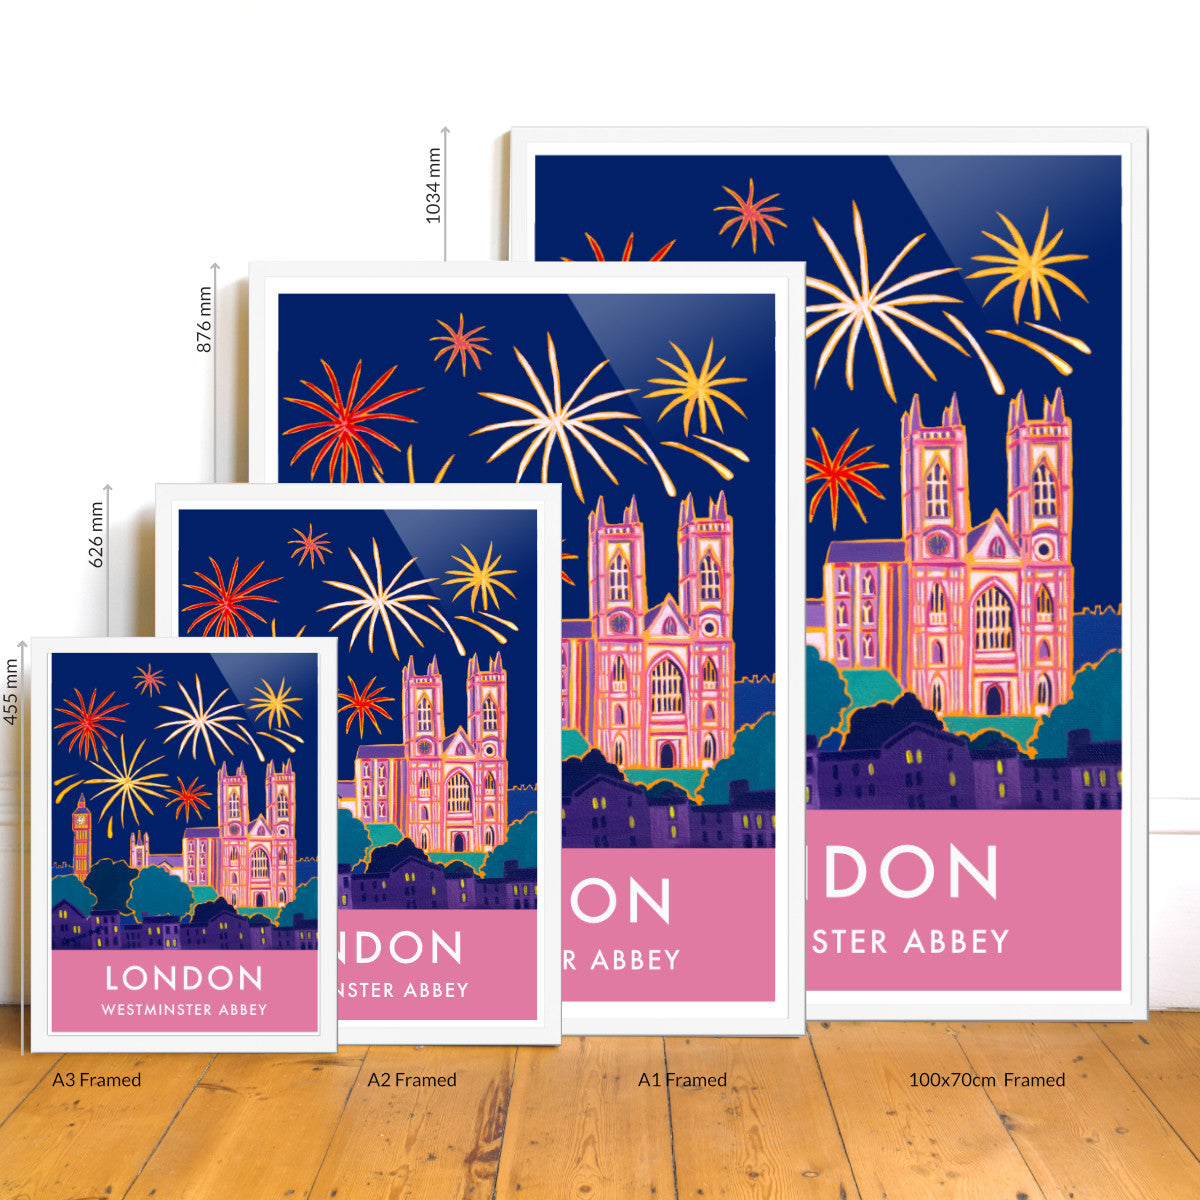 London Print of Westminster Abbey and Big Ben with Fireworks. Vintage Style Poster Design by British Artist Joanne Short